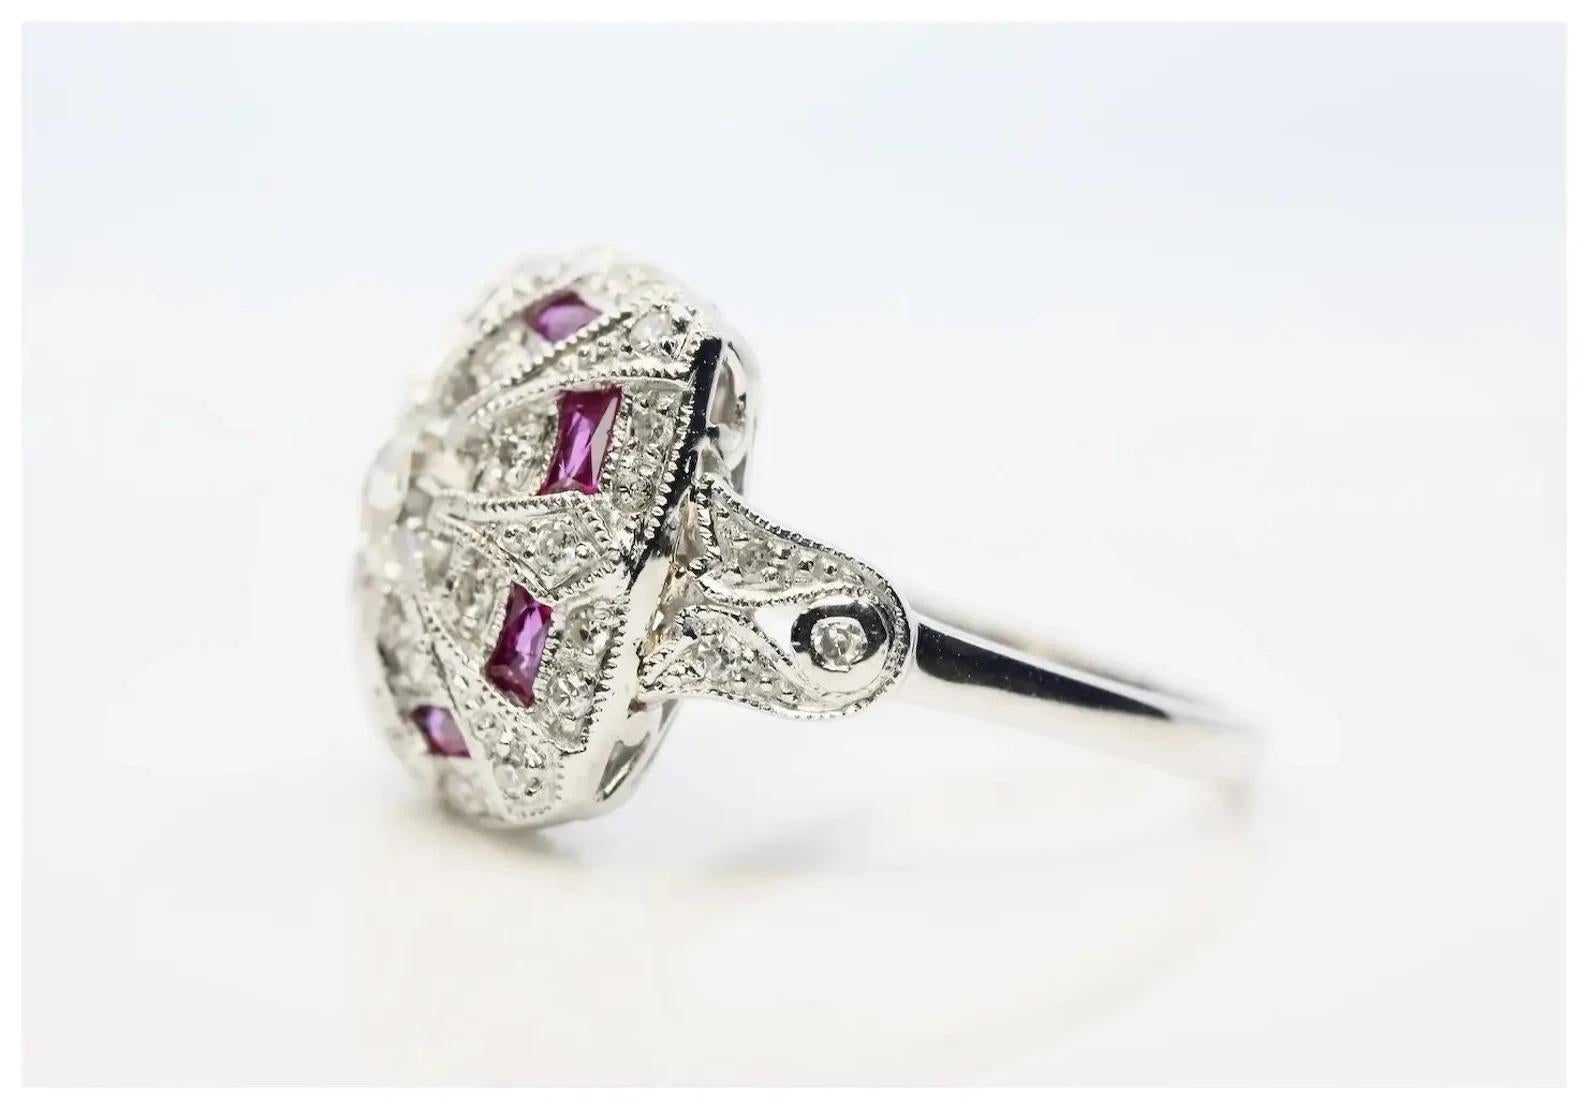 A beautiful Art Deco style diamond and French cut ruby ring in platinum.

Centered by a 0.60 carat old European cut diamond of VS2 clarity and J color.

Accented by eight French cut rubies of 0.48ctw with beautiful vivid red color.

Pave set